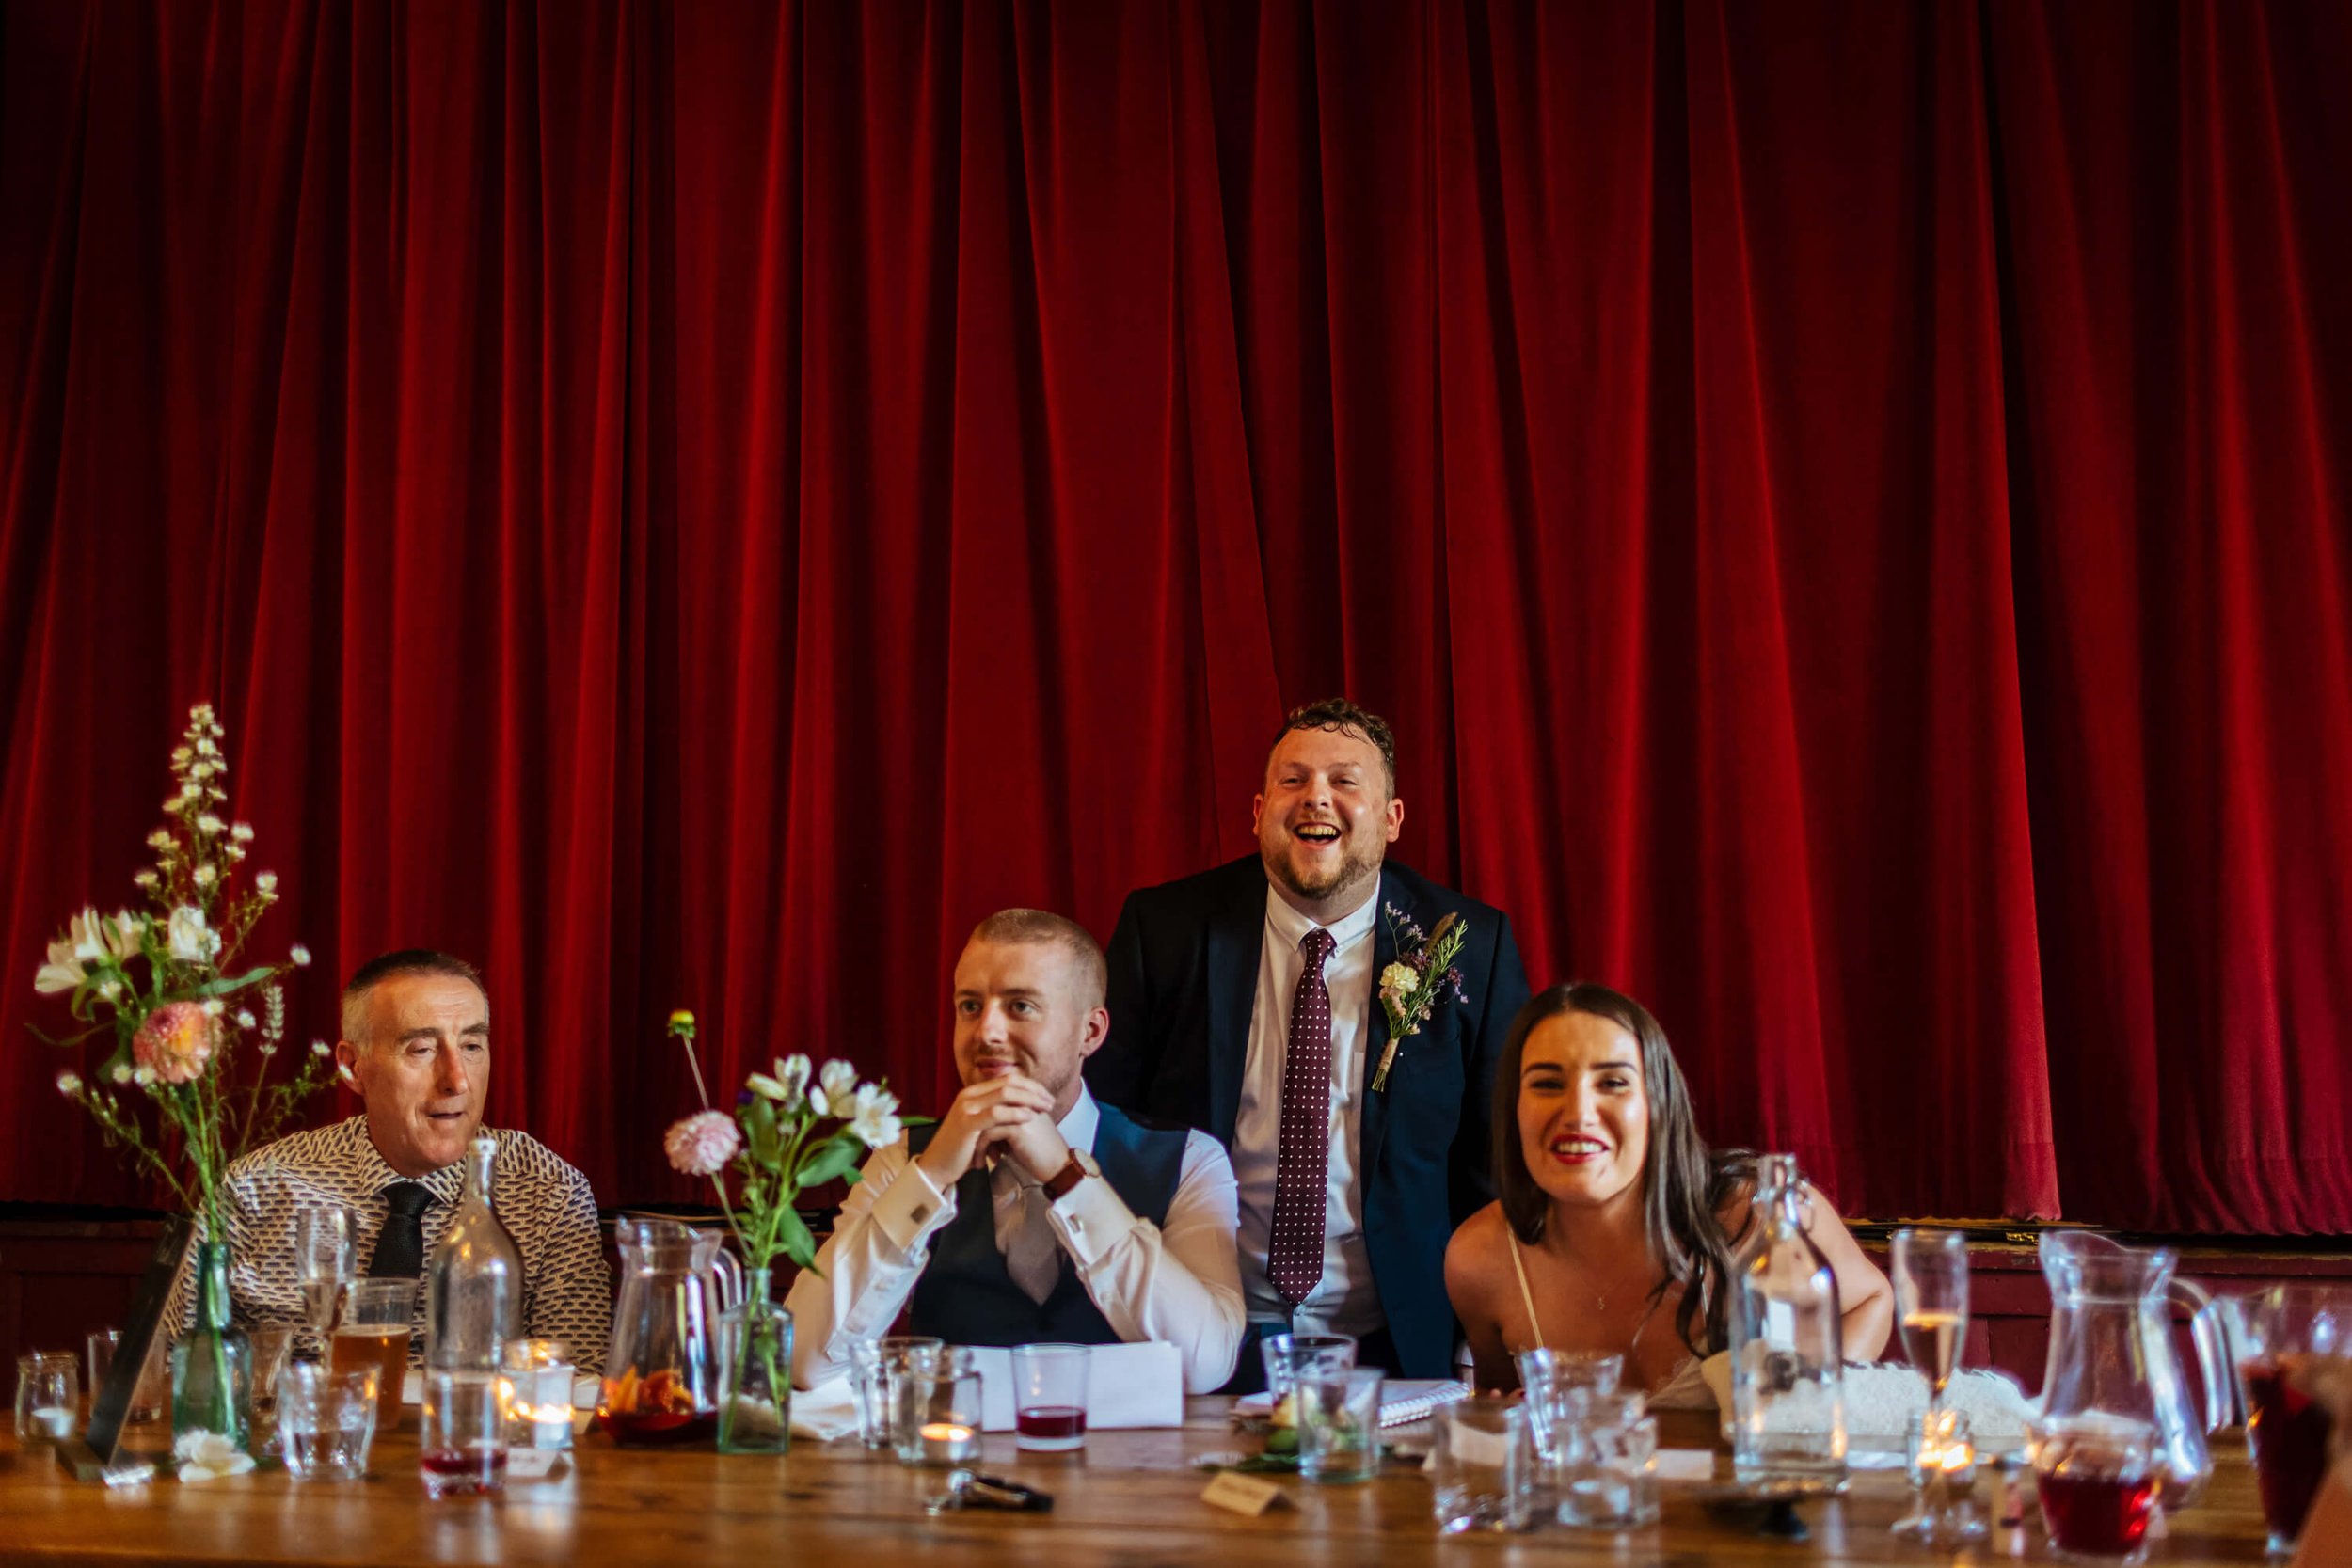 Wedding guests laughing during the speeches